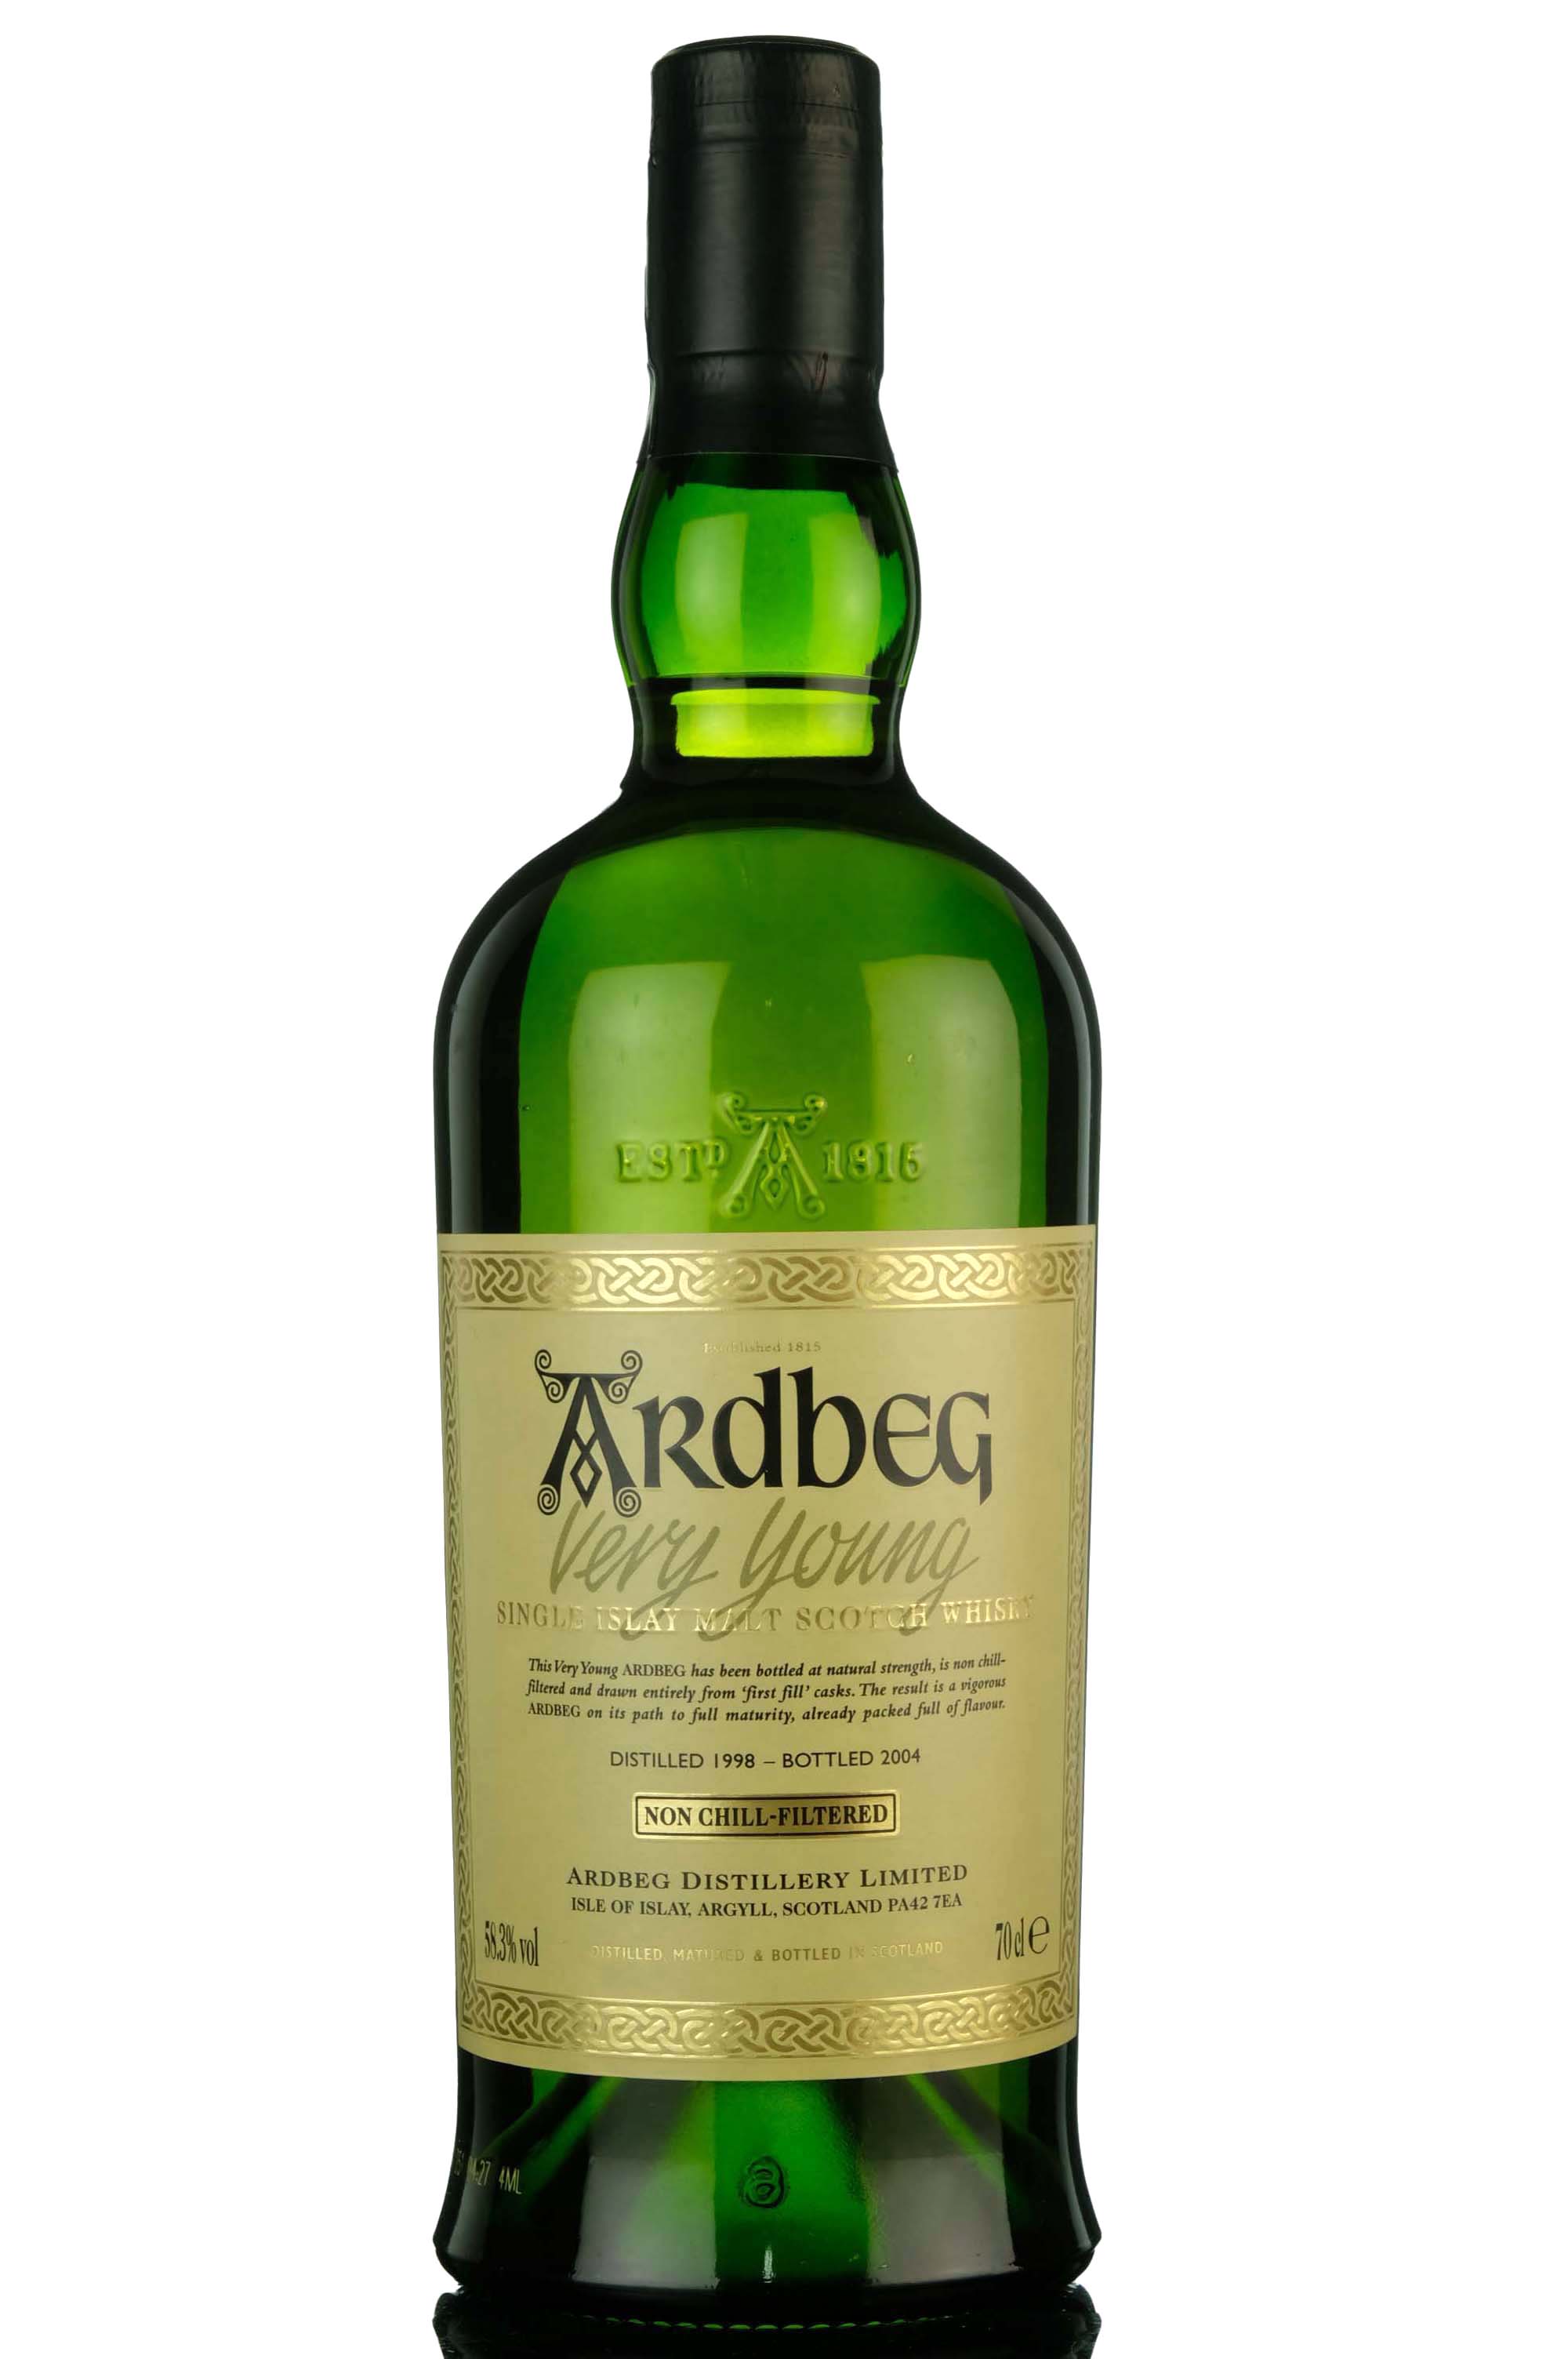 Ardbeg 1998-2004 - Very Young - First Release